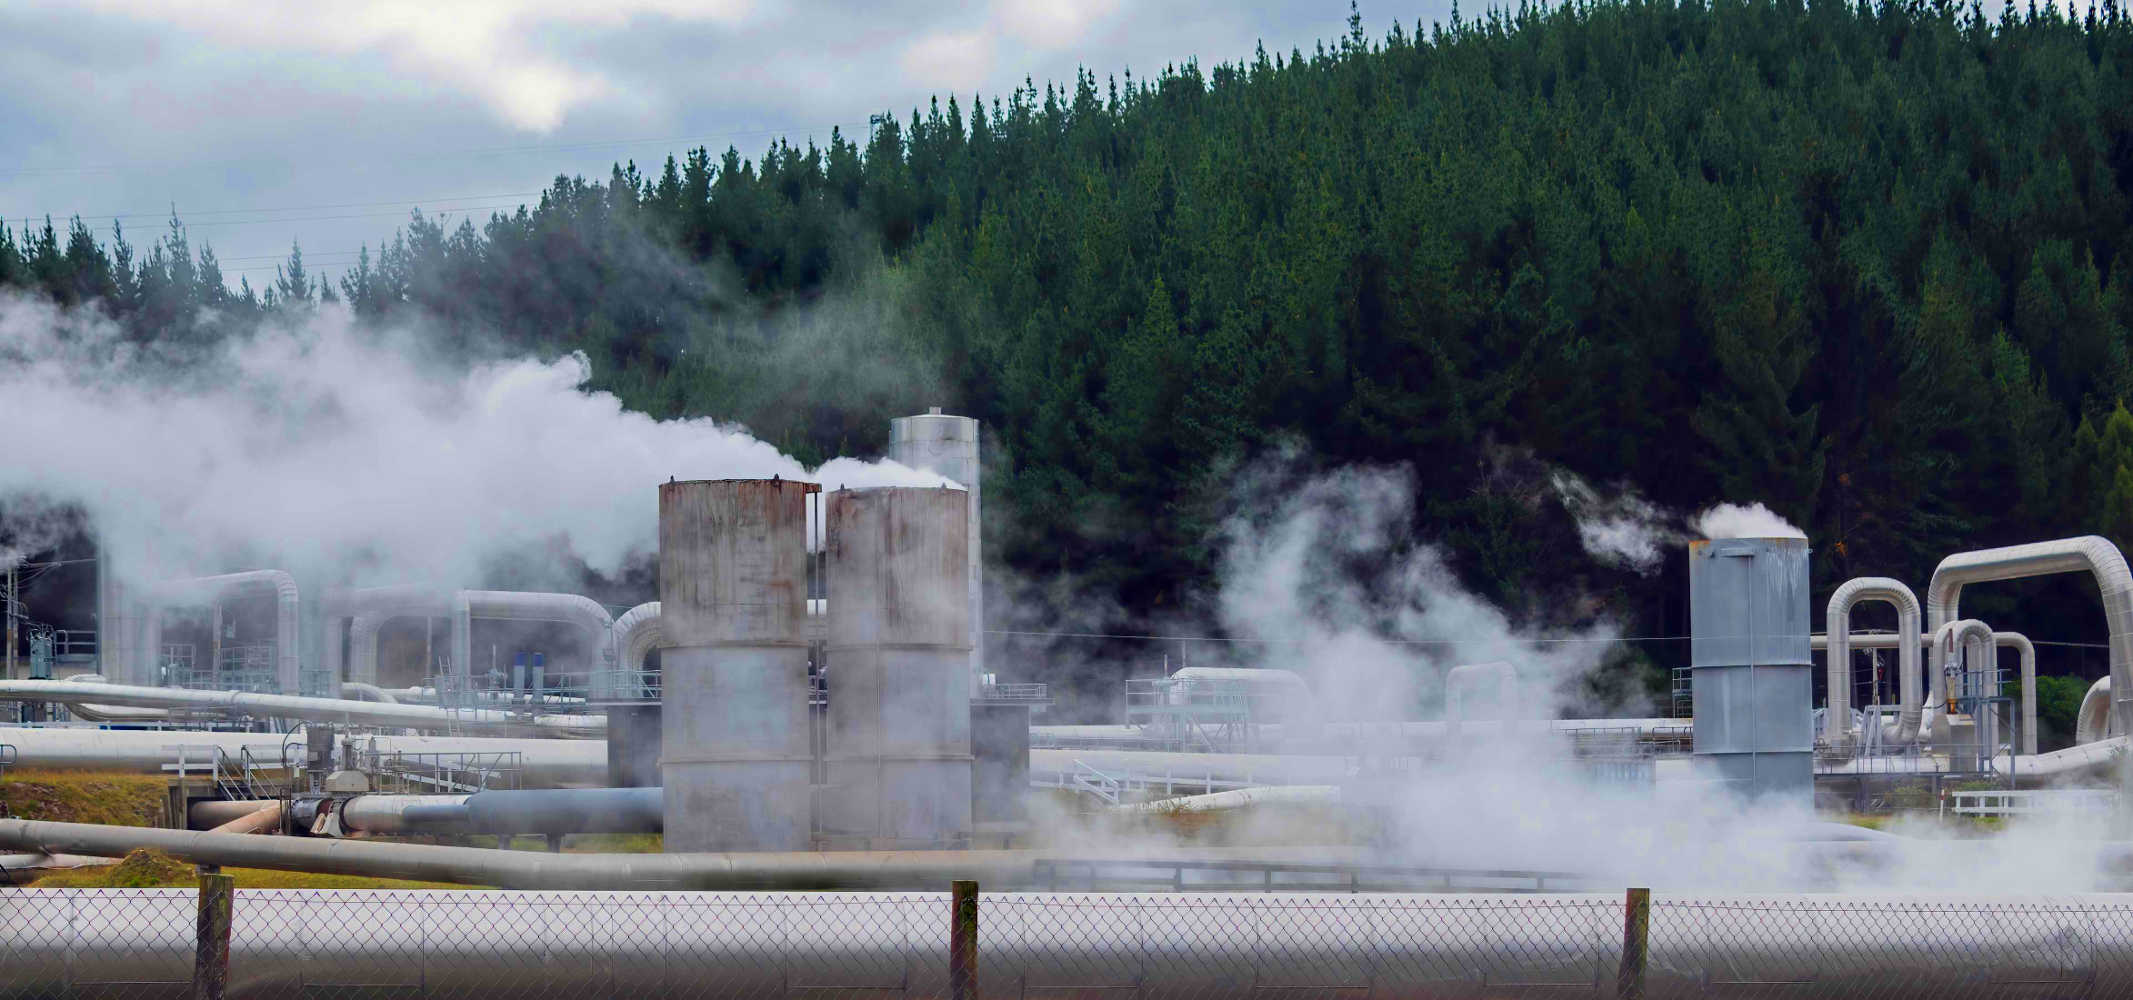 Geothermal plant, free attraction, Lake Taupo, New Zealand